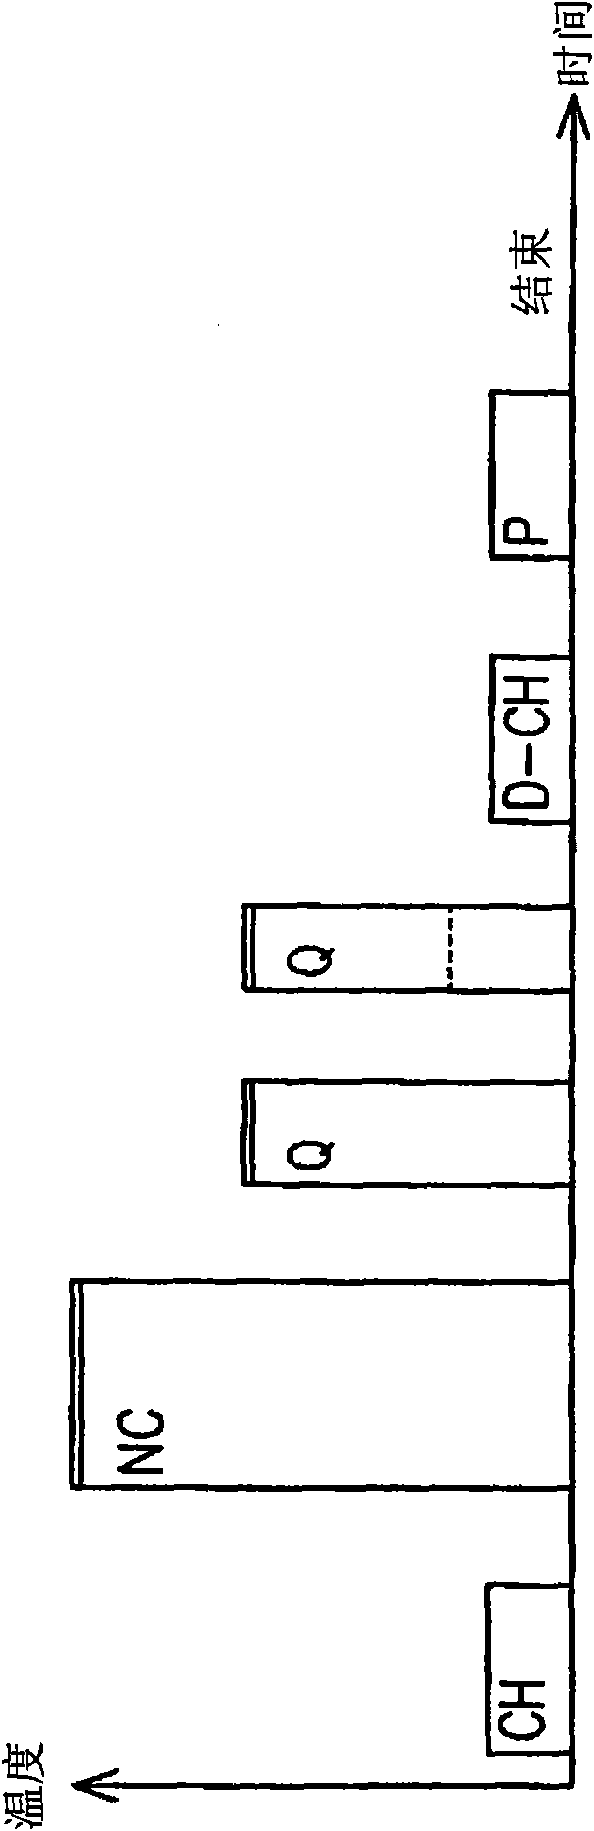 Method for producing corrosion-resistant surfaces of nitrated or nitrocarburated steel components